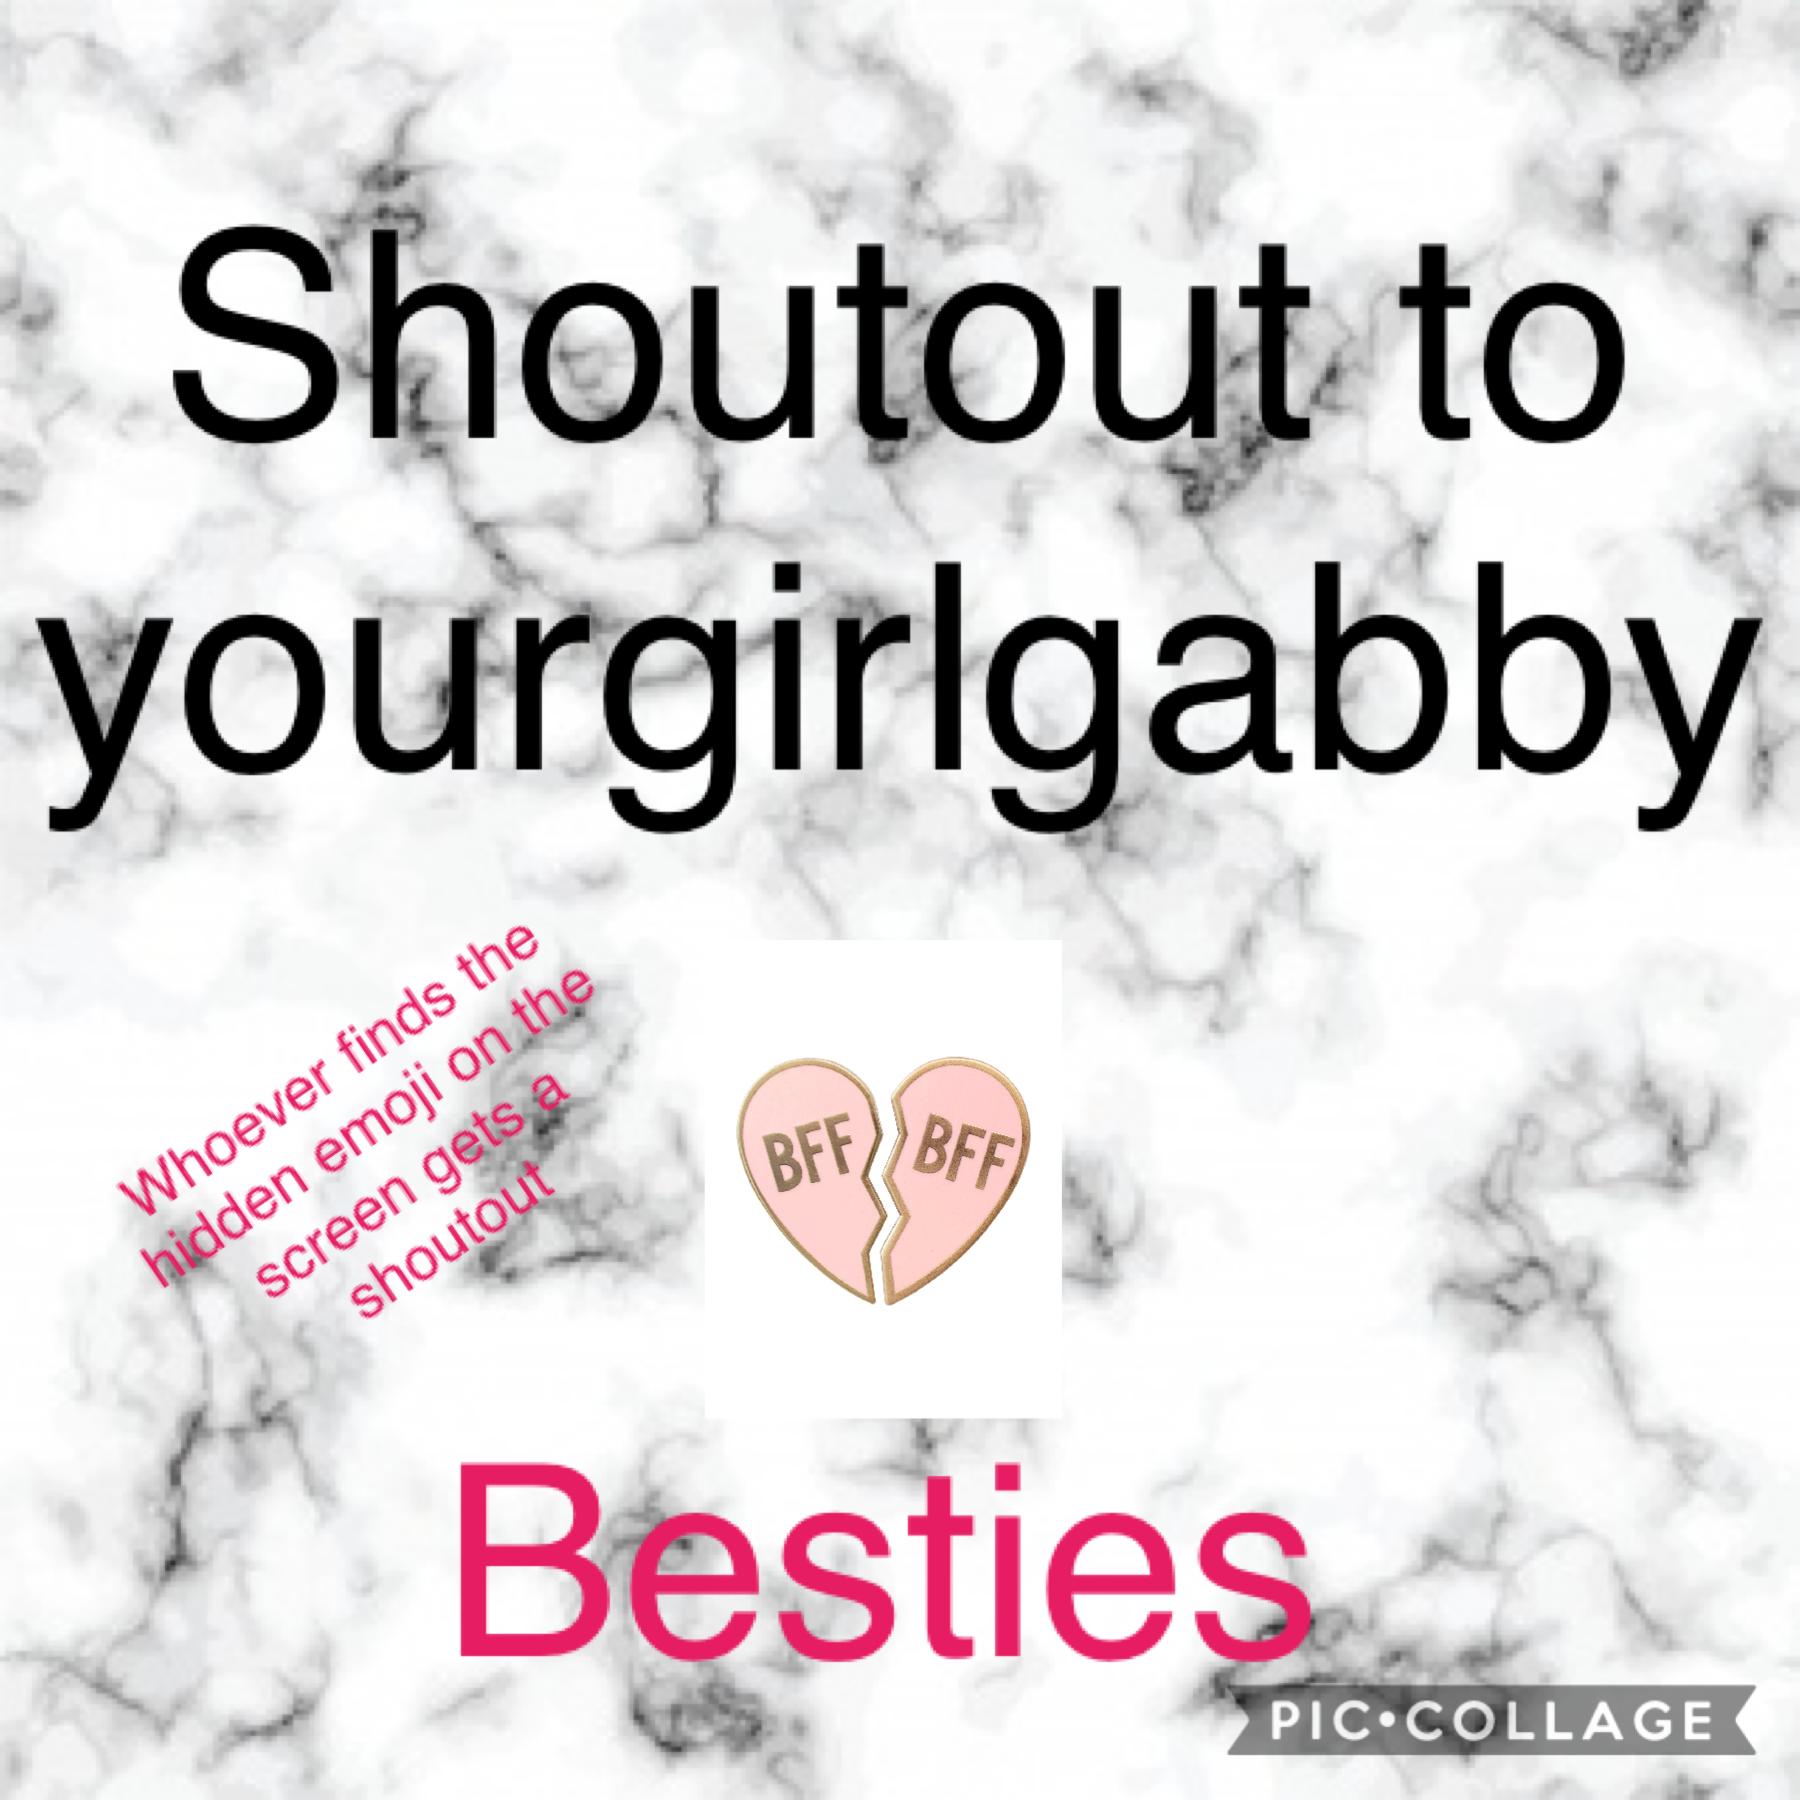 Thx gabby for the shoutout on ur account! Everyone go follow yourgirlgabby right now ☺️😘 love u guys